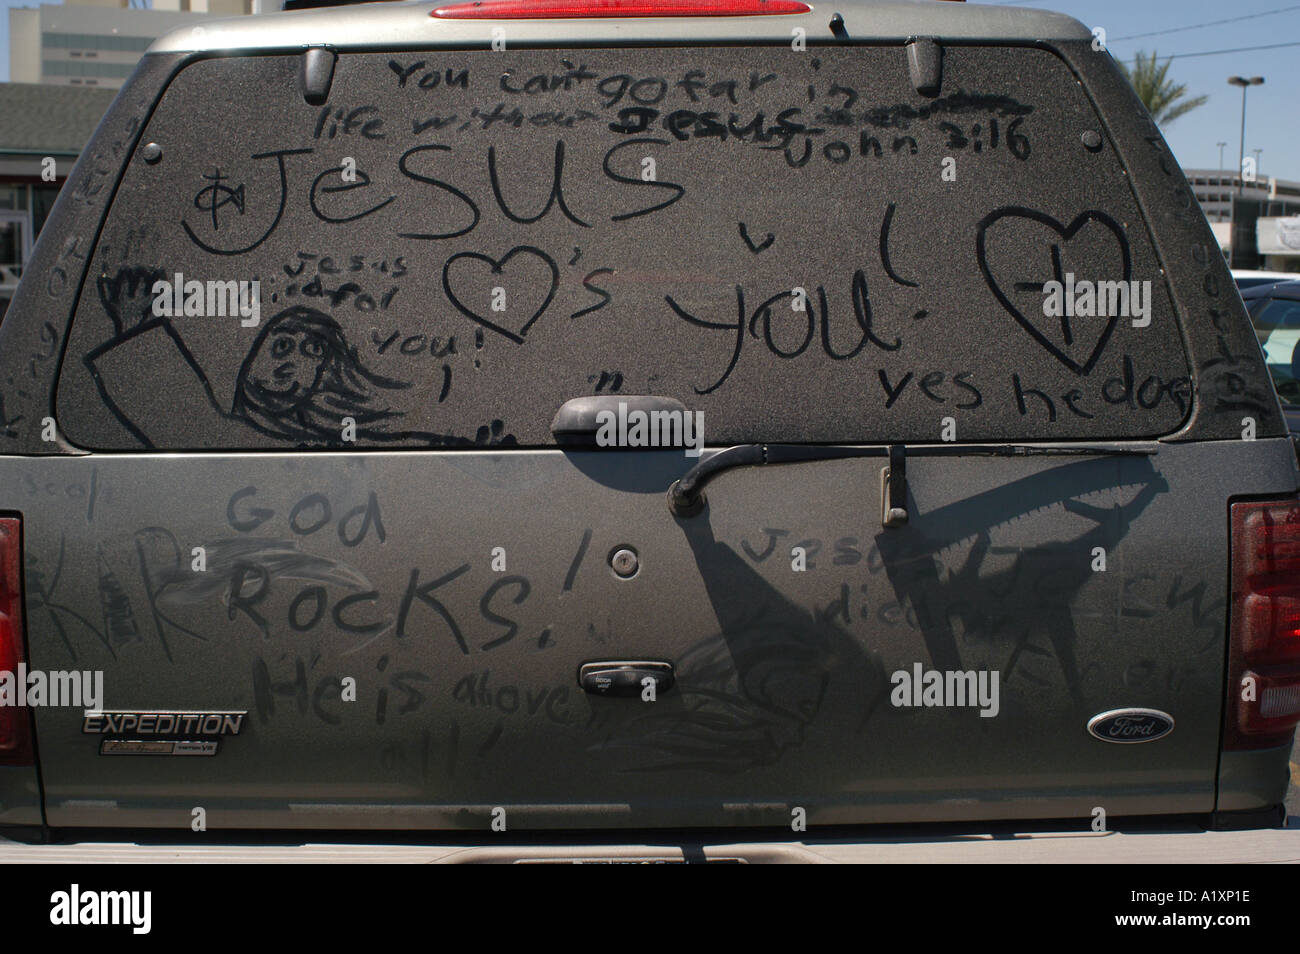 Religous graffitti finger painted in dirt on the rea window of an American car Stock Photo